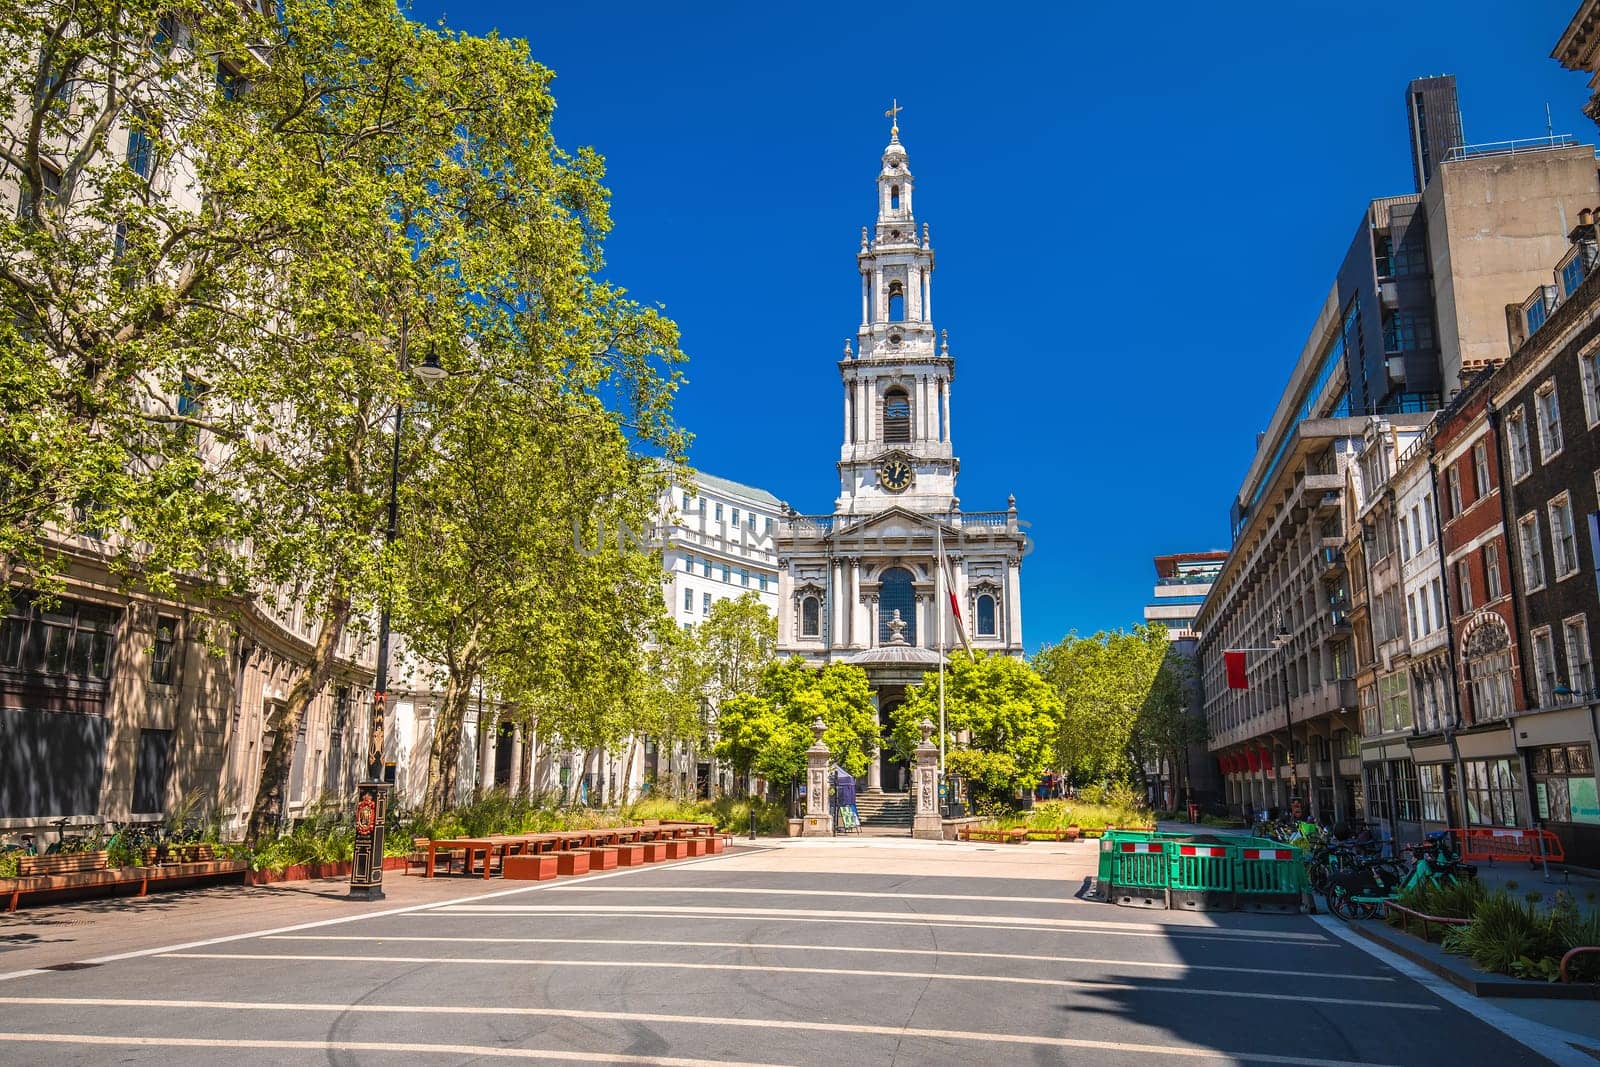 St Clement Danes Church in London street view by xbrchx